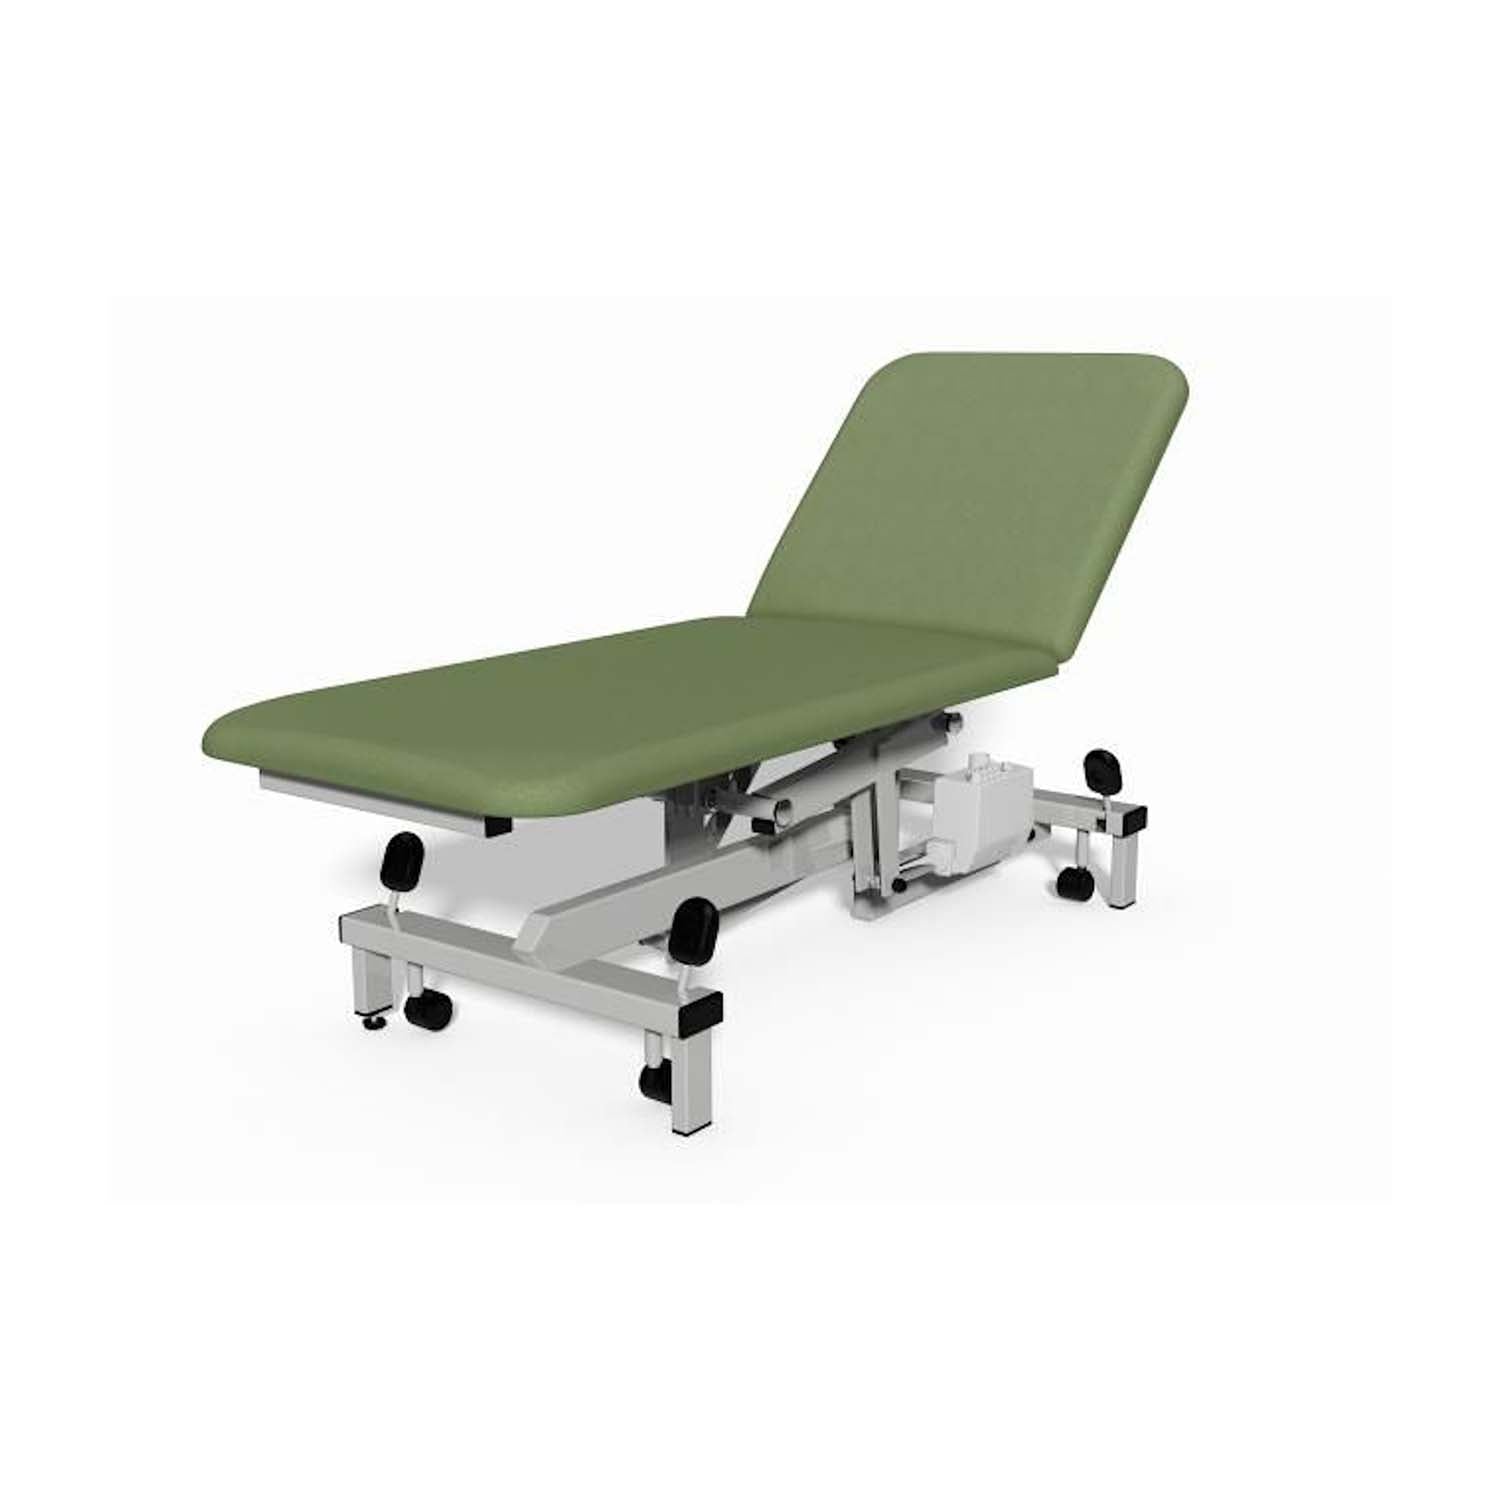 Plinth 2000 Model 502 Examination Couch | Electric | Wasabi